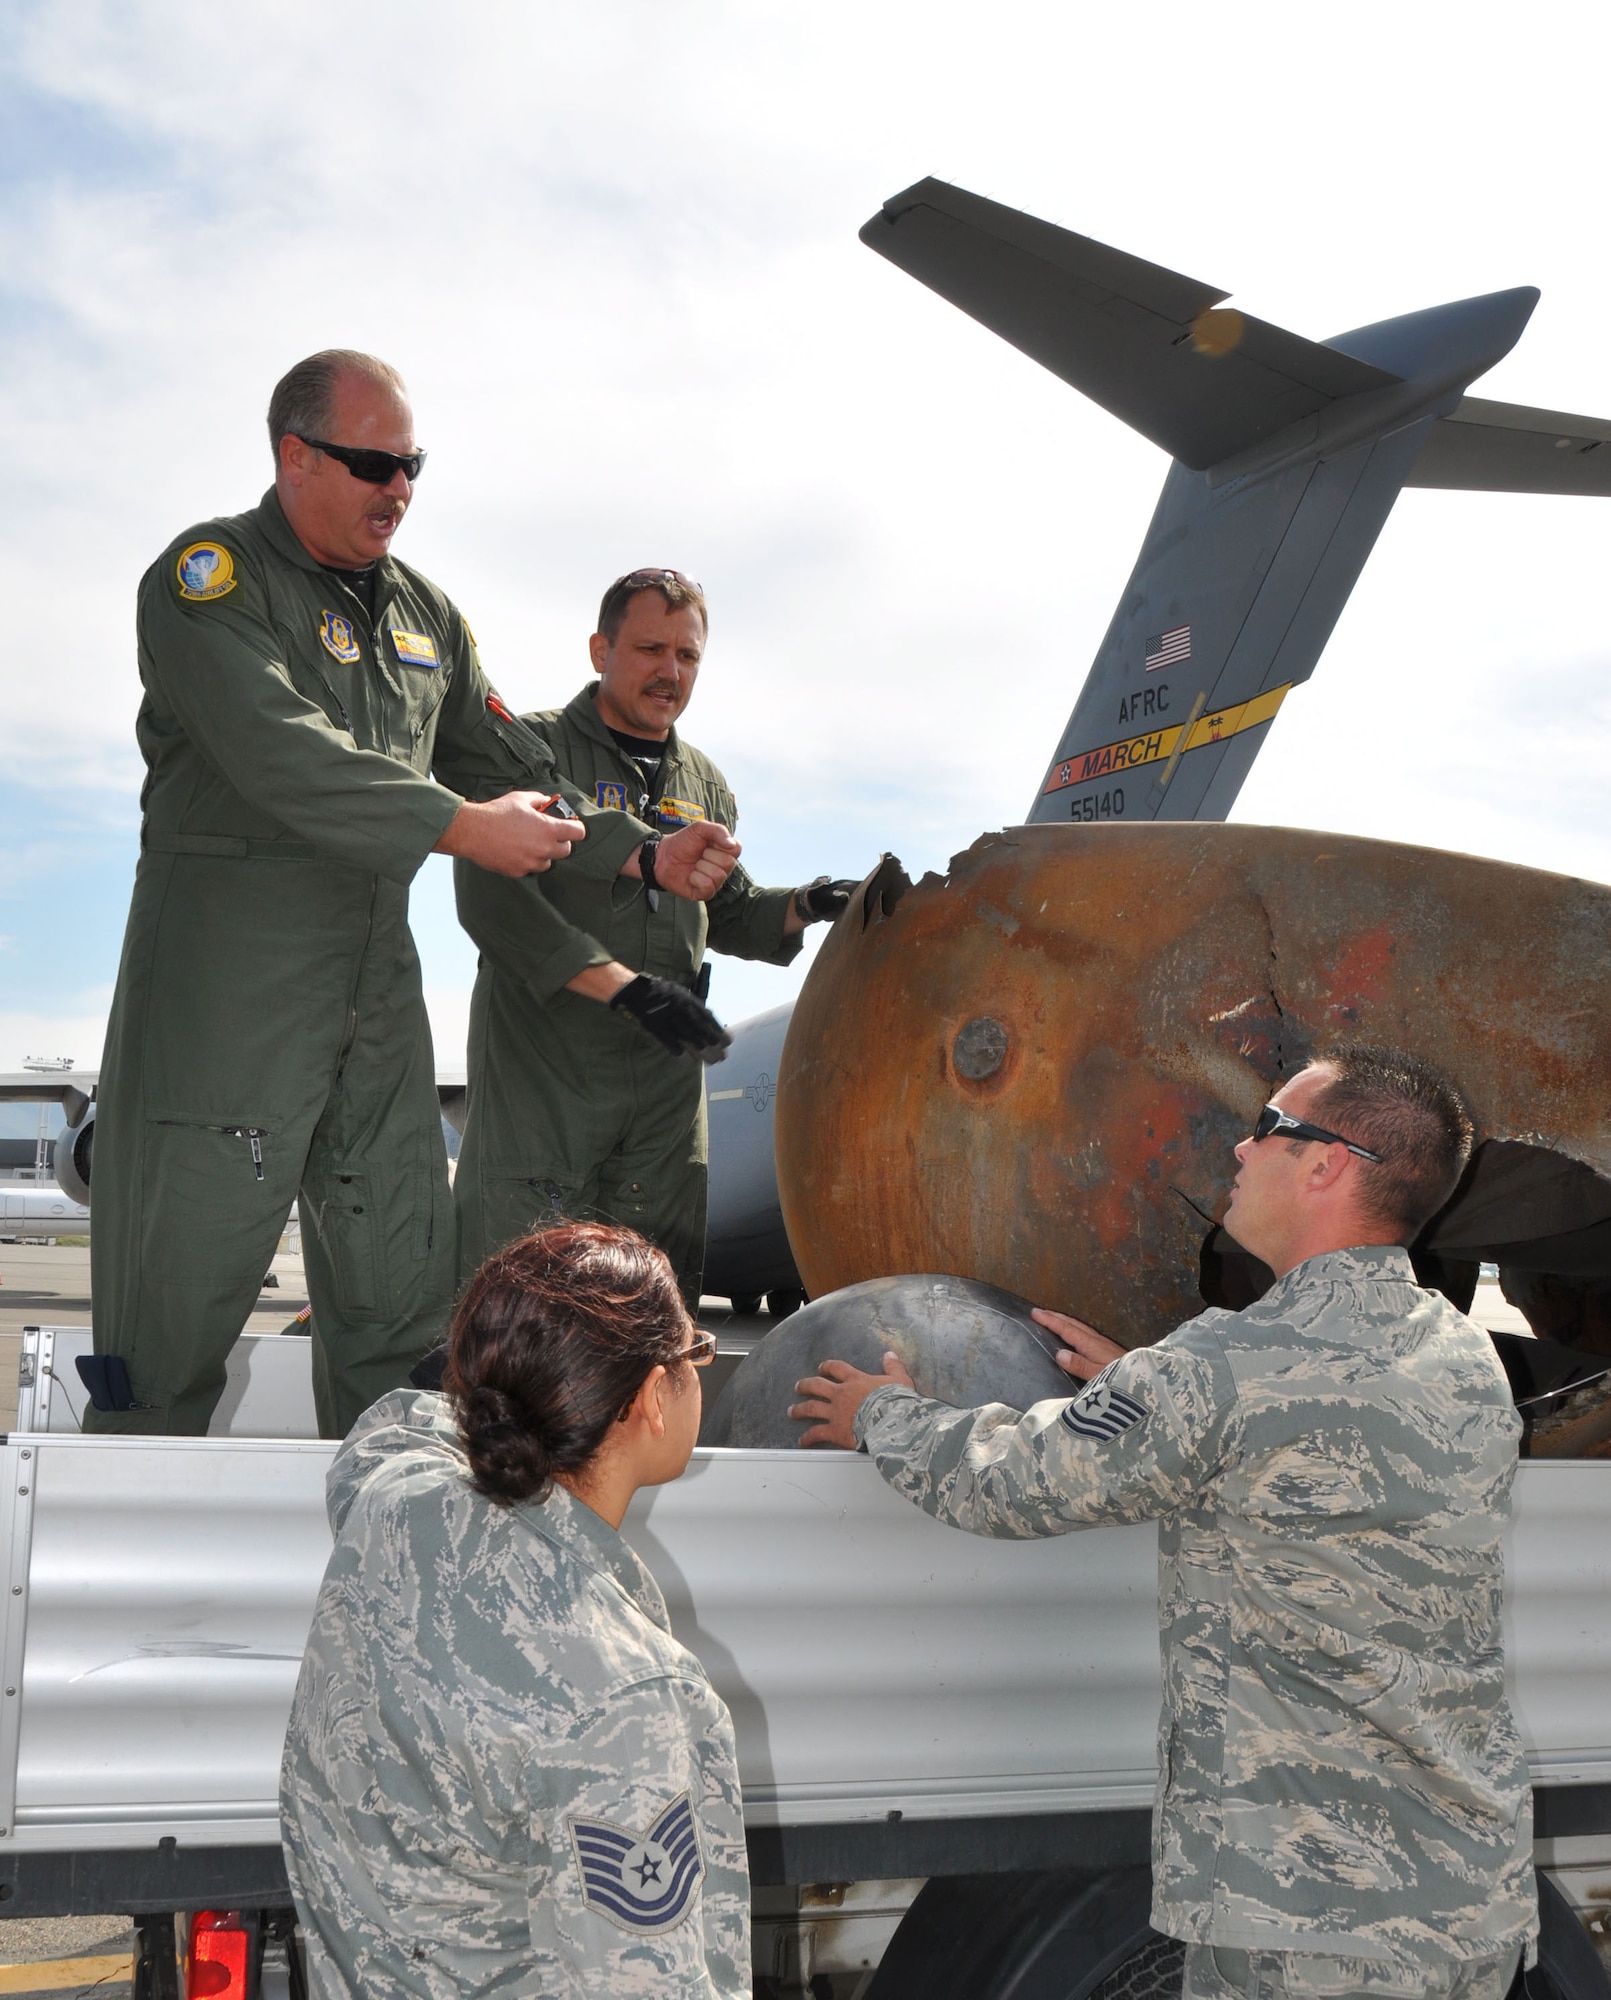 (clockwise from back left) Master Sgt. Lance Augustine, Tech. Sgt. Ronald Dunn, Tech. Sgt. John Lowe and Staff Sgt. Renee Young discuss a plan for loading expended rocket parts onto the C-17 Globemaster III, in Mongolia, Aug. 26, 2011.  The rocket parts had fallen to earth and landed in Mongolia last summer.  The March aircraft and crew were selected for the retrieval mission.  (U.S. Air Force photo/Master Sgt. Linda Welz)